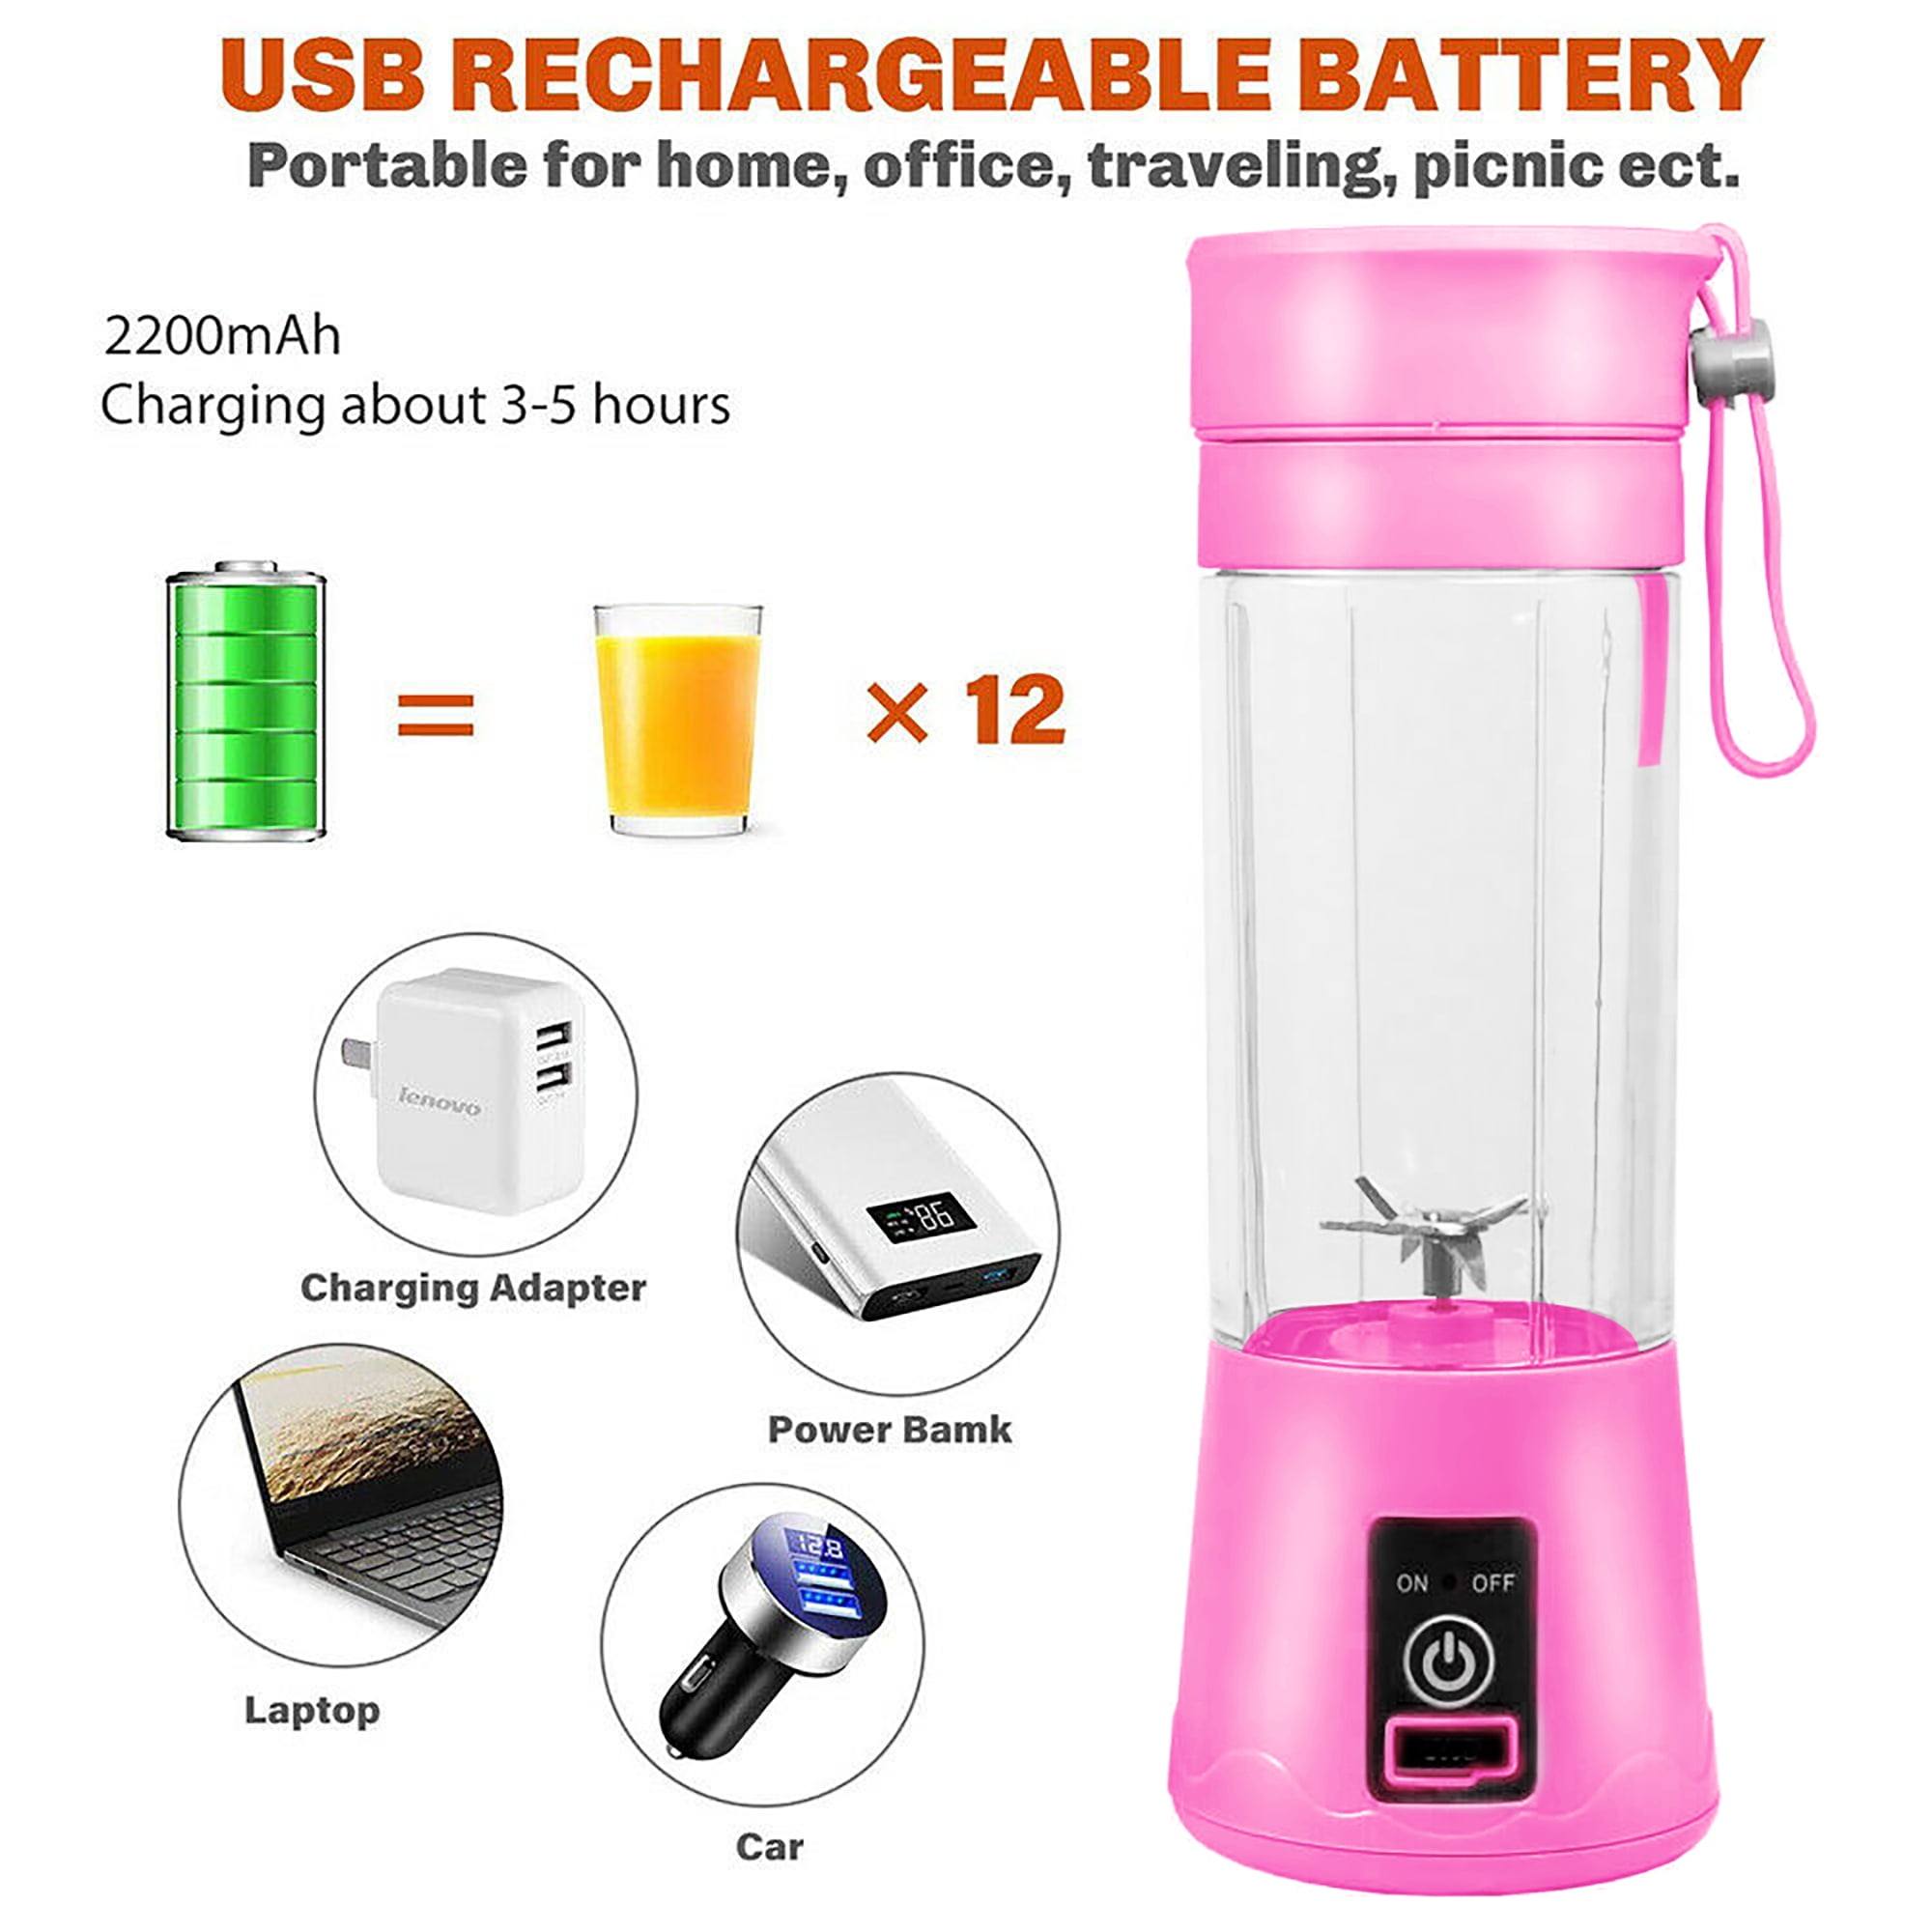 6blade Portable Blender Mini Juicer Cup Extractor Smoothie USB Chargin –  Yogatation